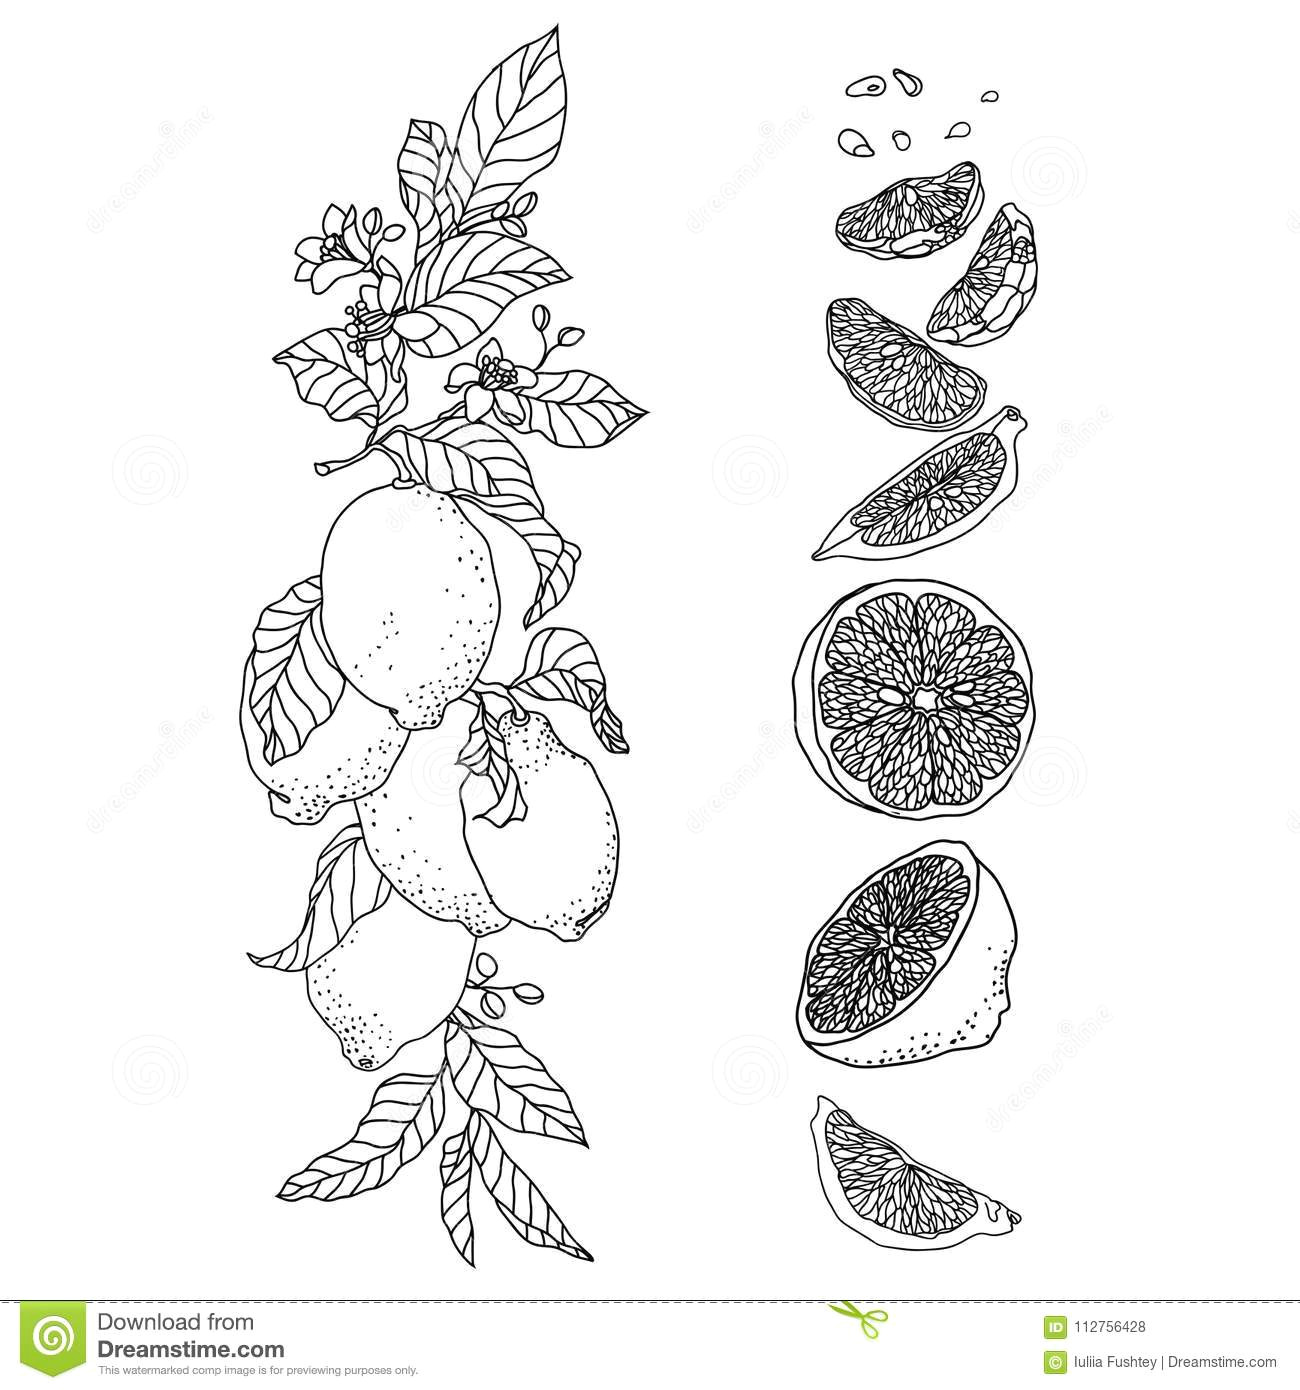 Drawings Of Flowers On Branches Set with Lemon Plant Vertical Branch with Flowers and Fruits Stock